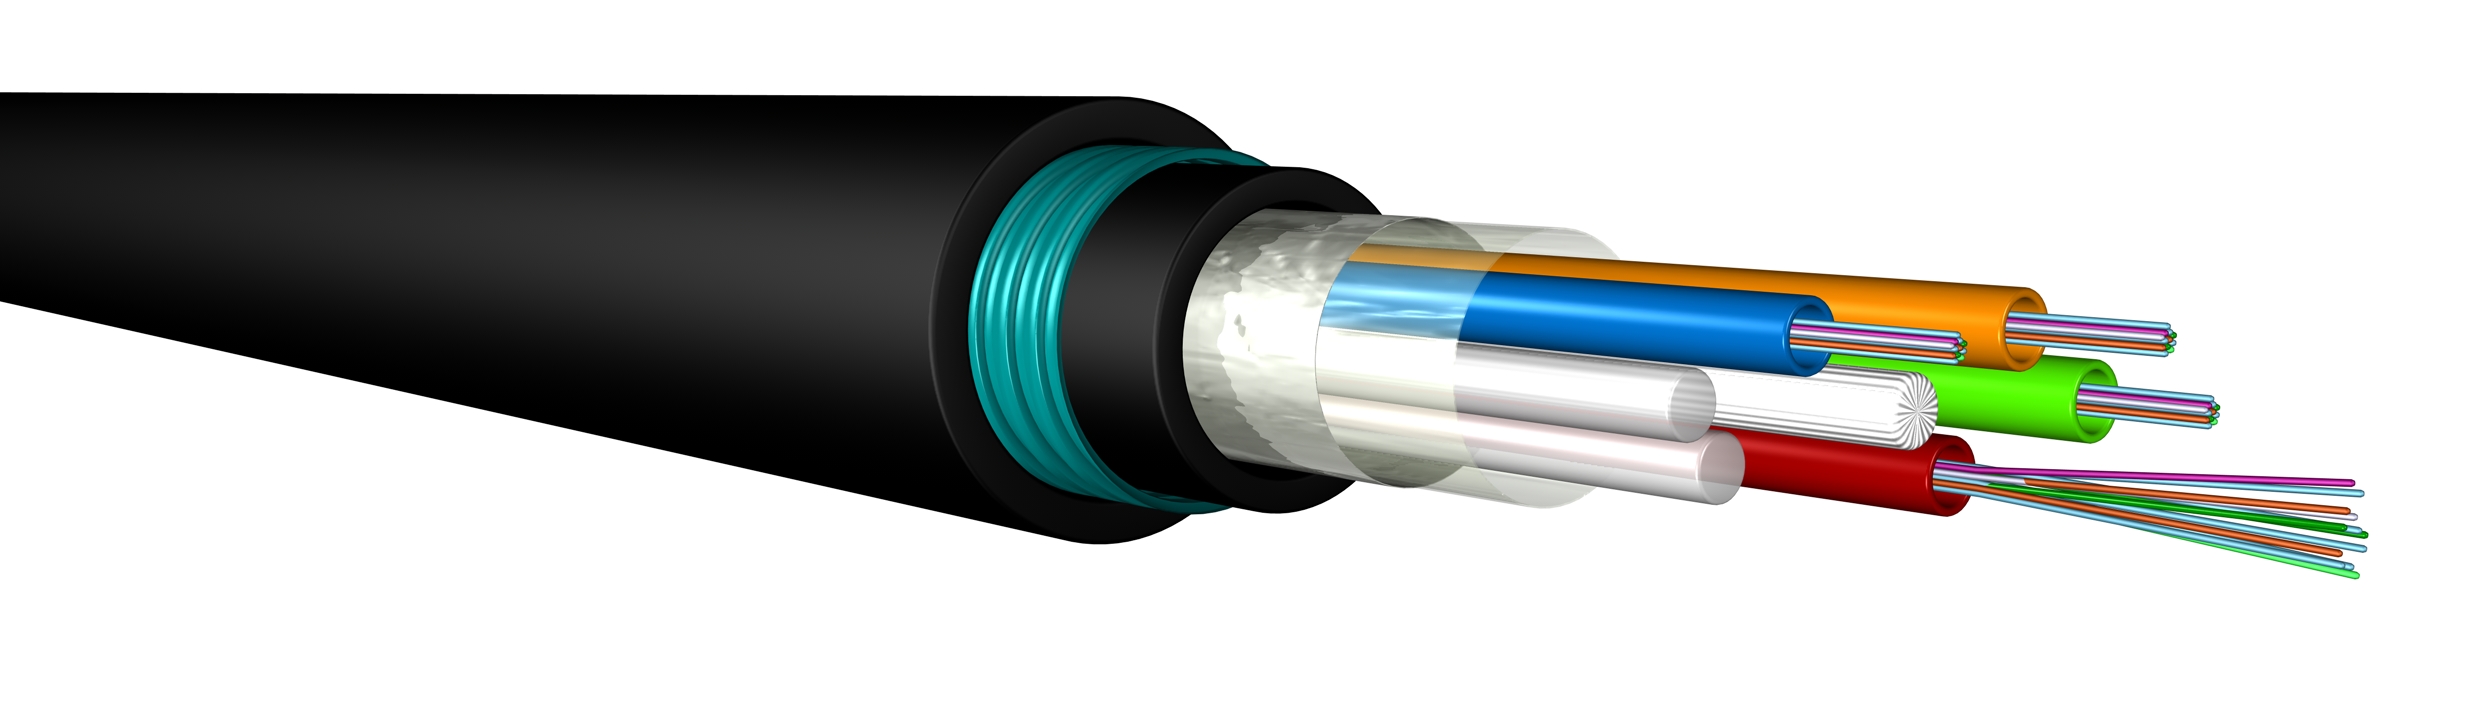 I12: UCFIBRE™ Universal Stranded Loose Tube Cable